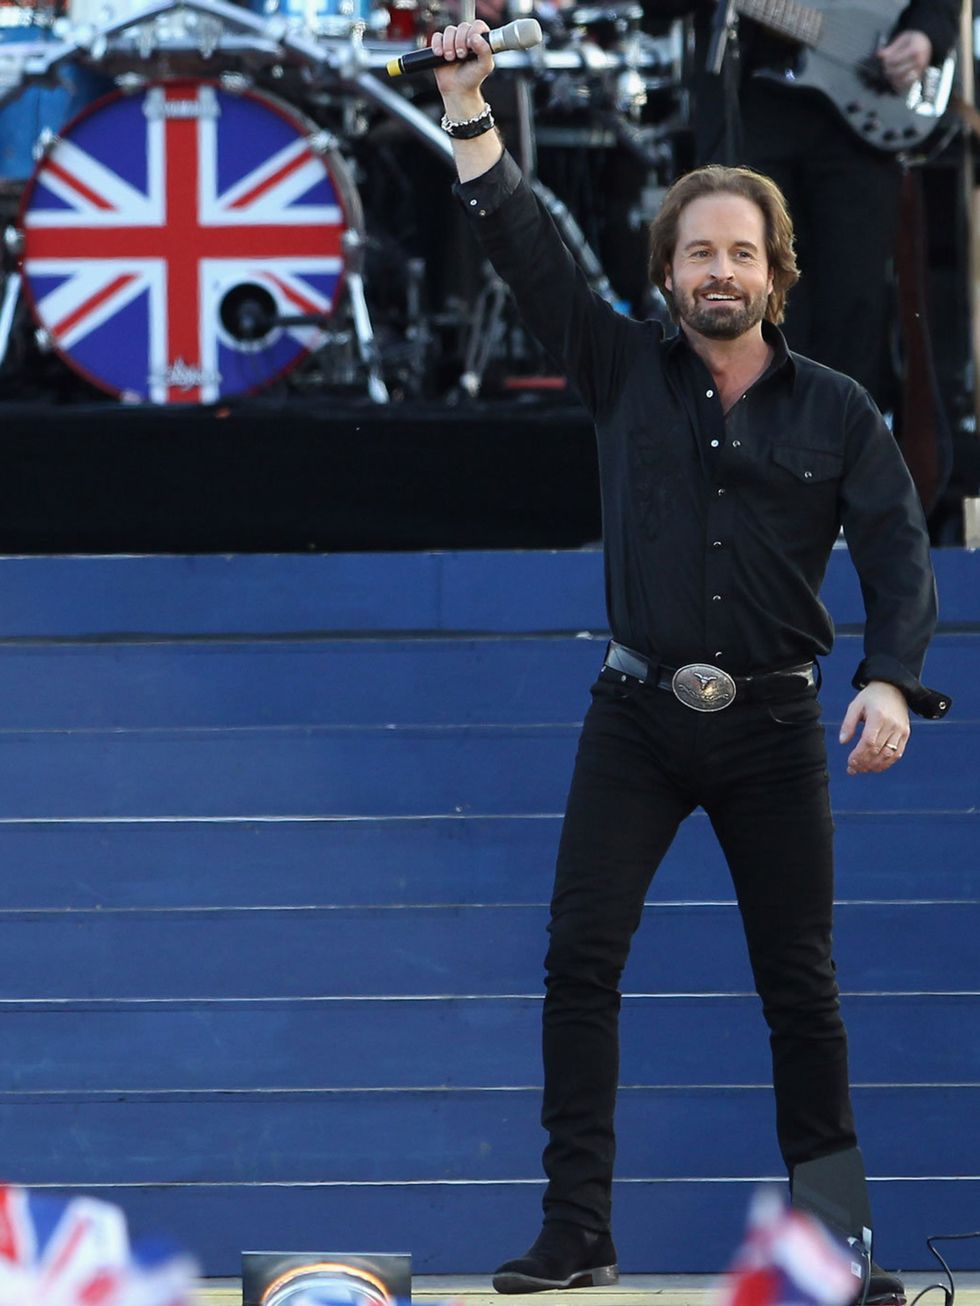 <p>Alfie Boe, who has performed in productions of Les Miserables, sang classic opera songs for Her Majesty Queen Elizabeth II at the Diamond Jubilee Concert in London.</p>